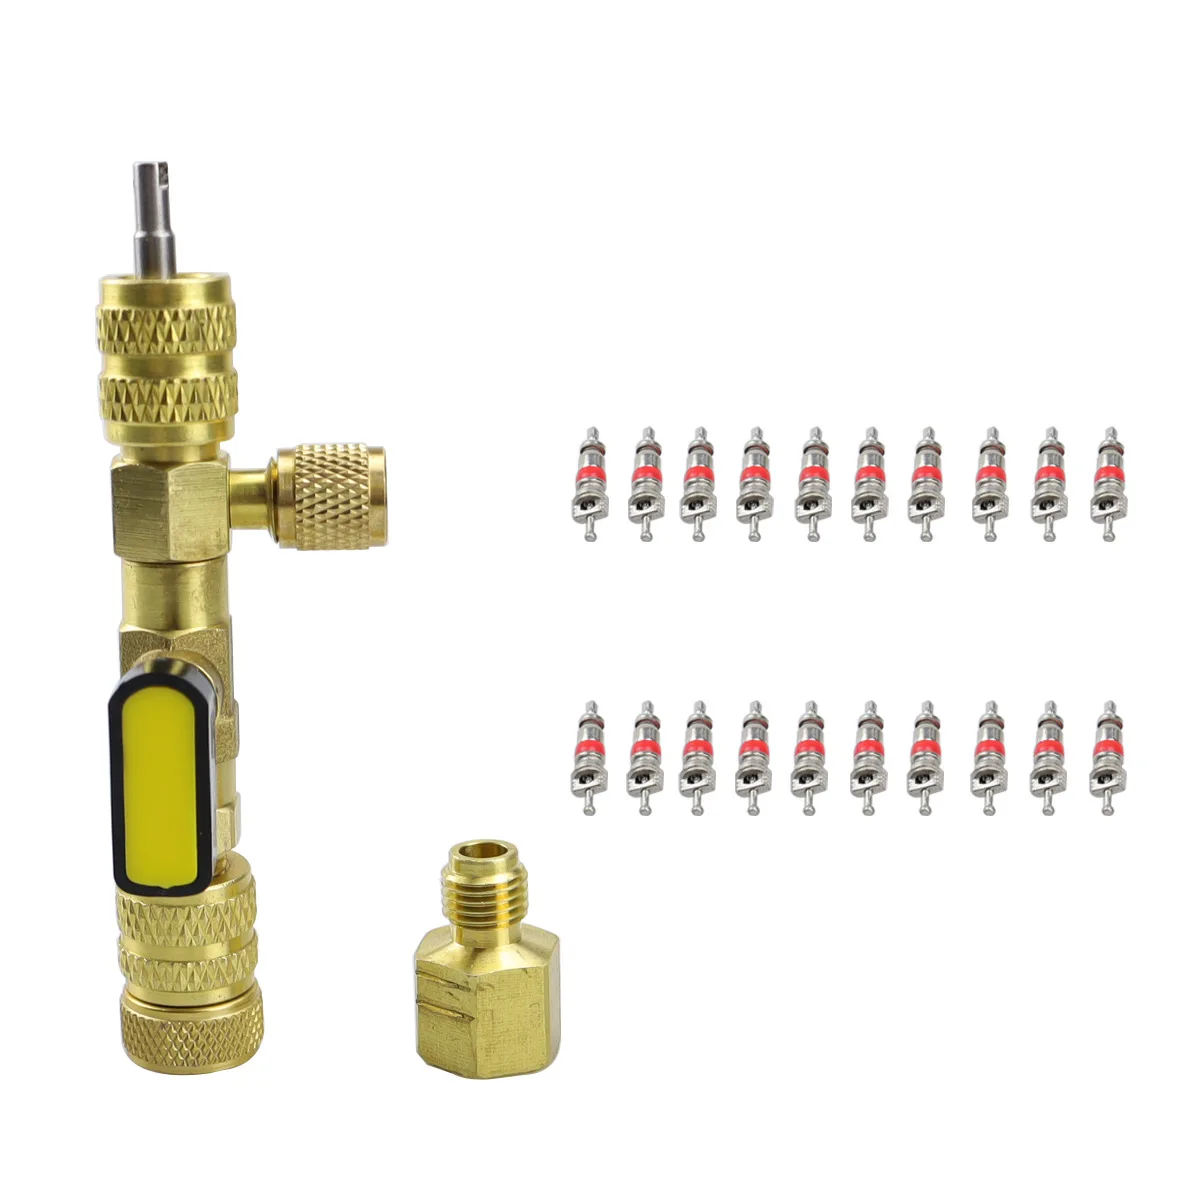 

Valve Core Remover Installer With SAE 1/4 Port Air Conditioning Line Repair Tools Kit For HVAC R22 R32 R410A System